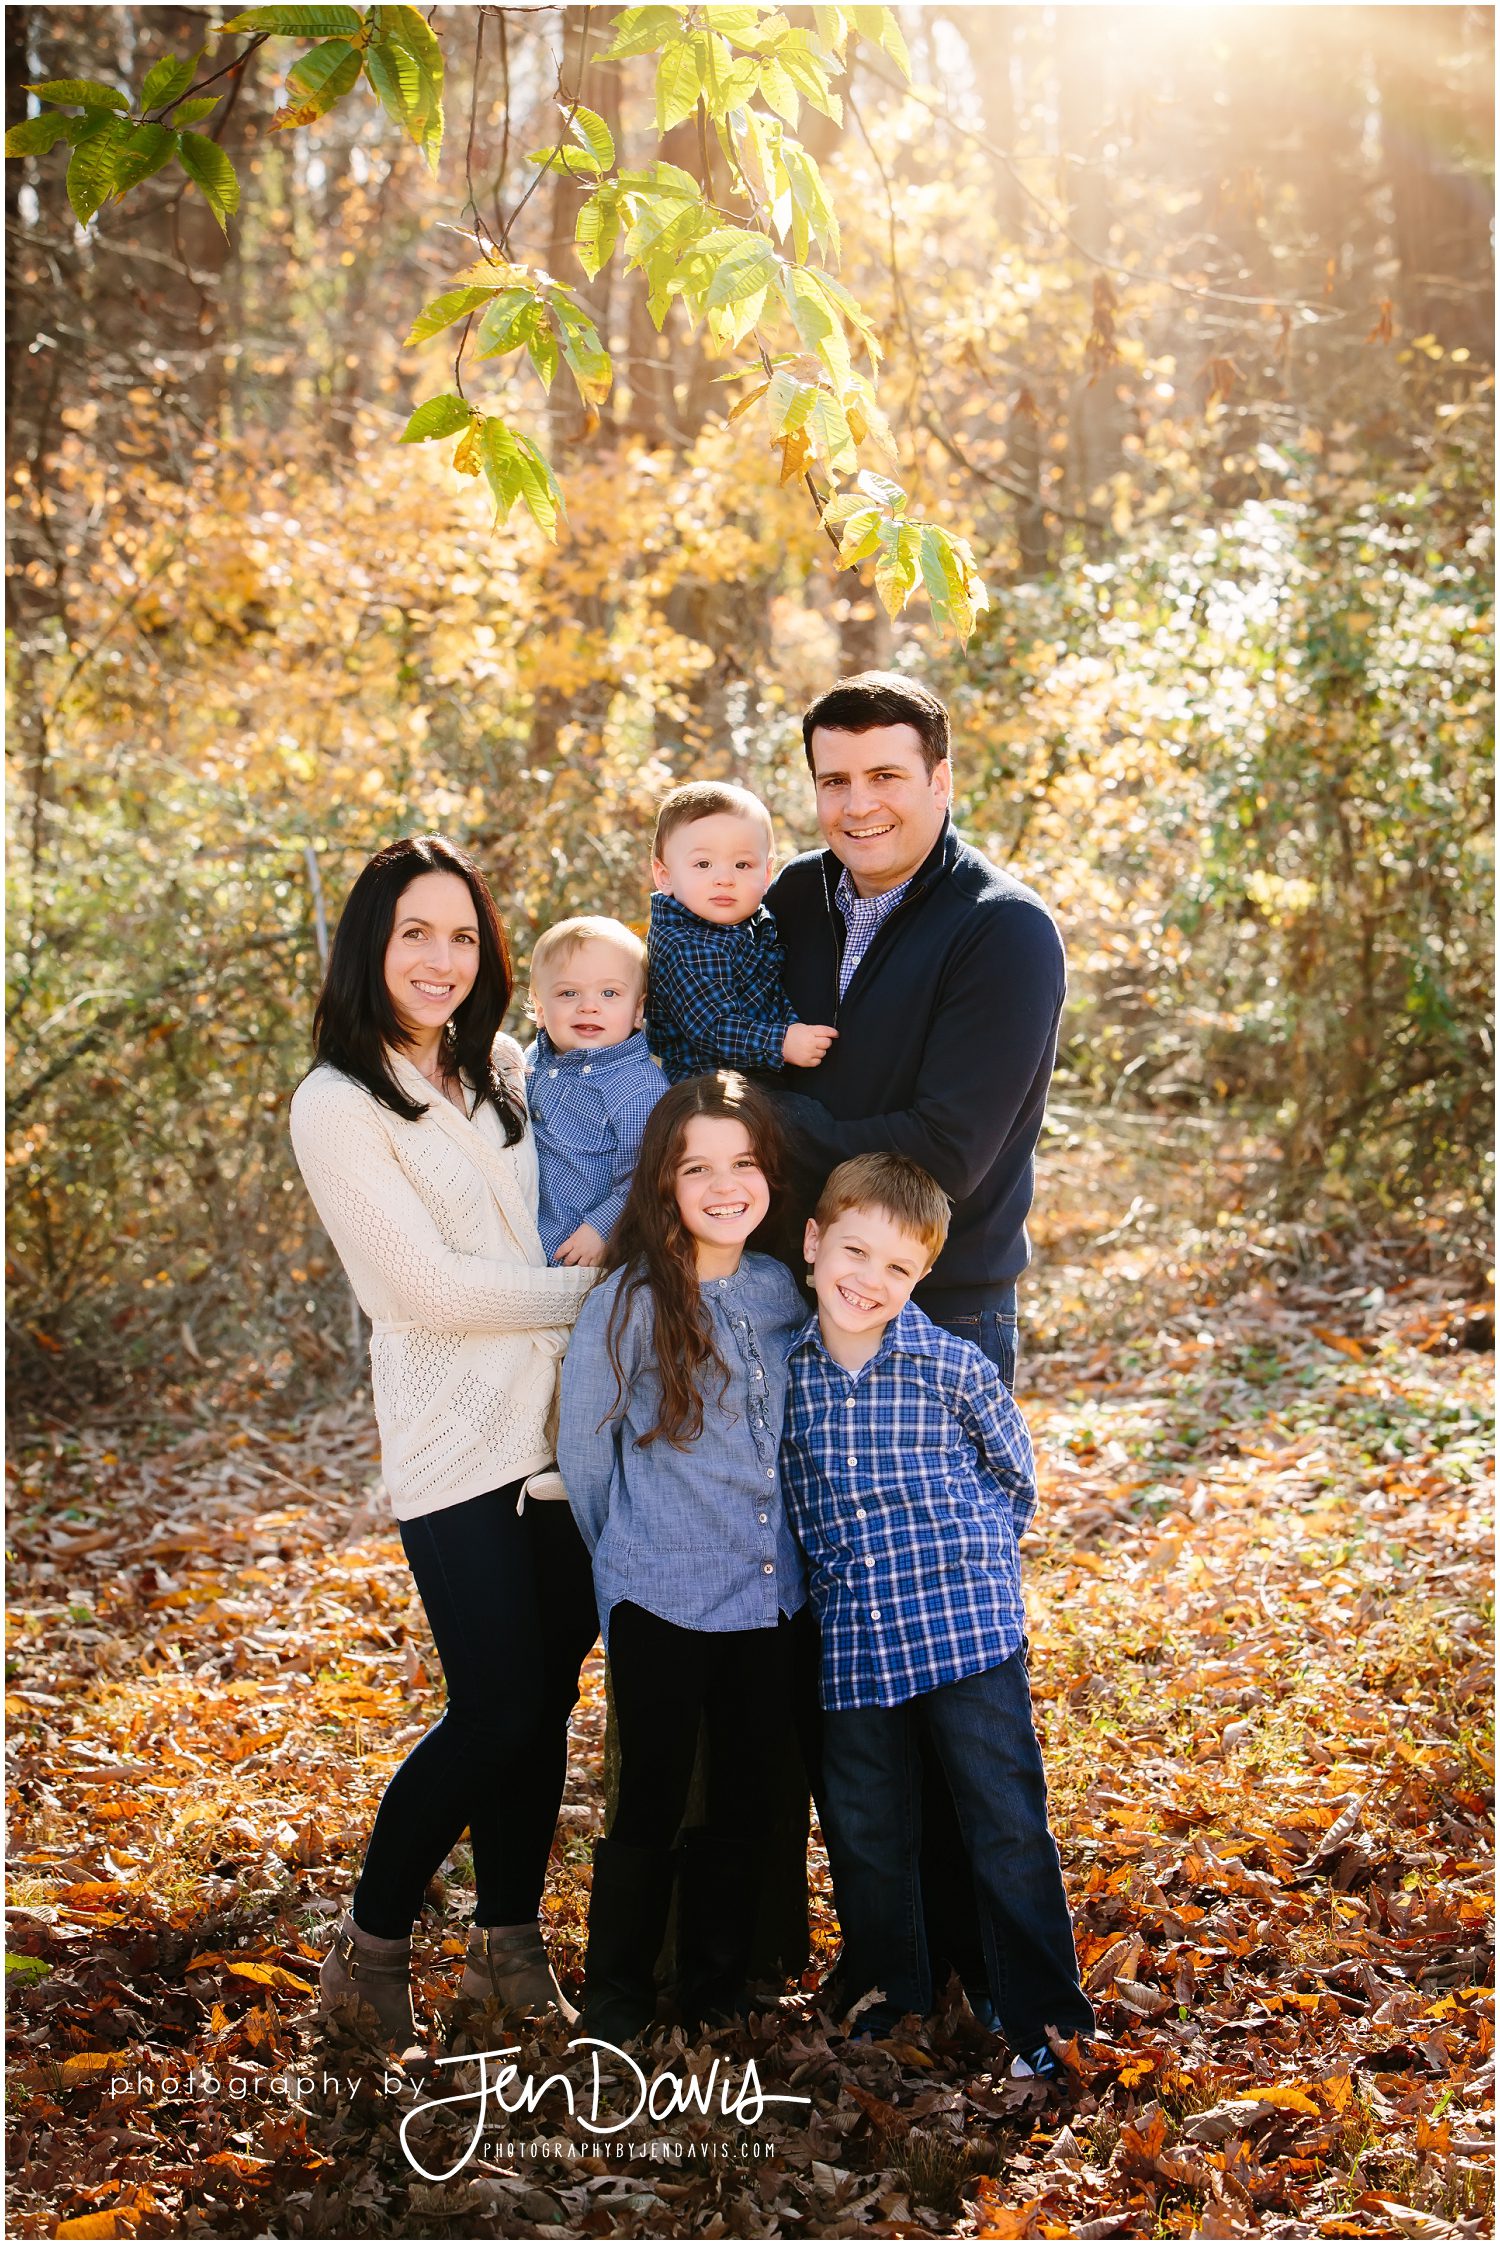 Family of 6 standing in the leaves